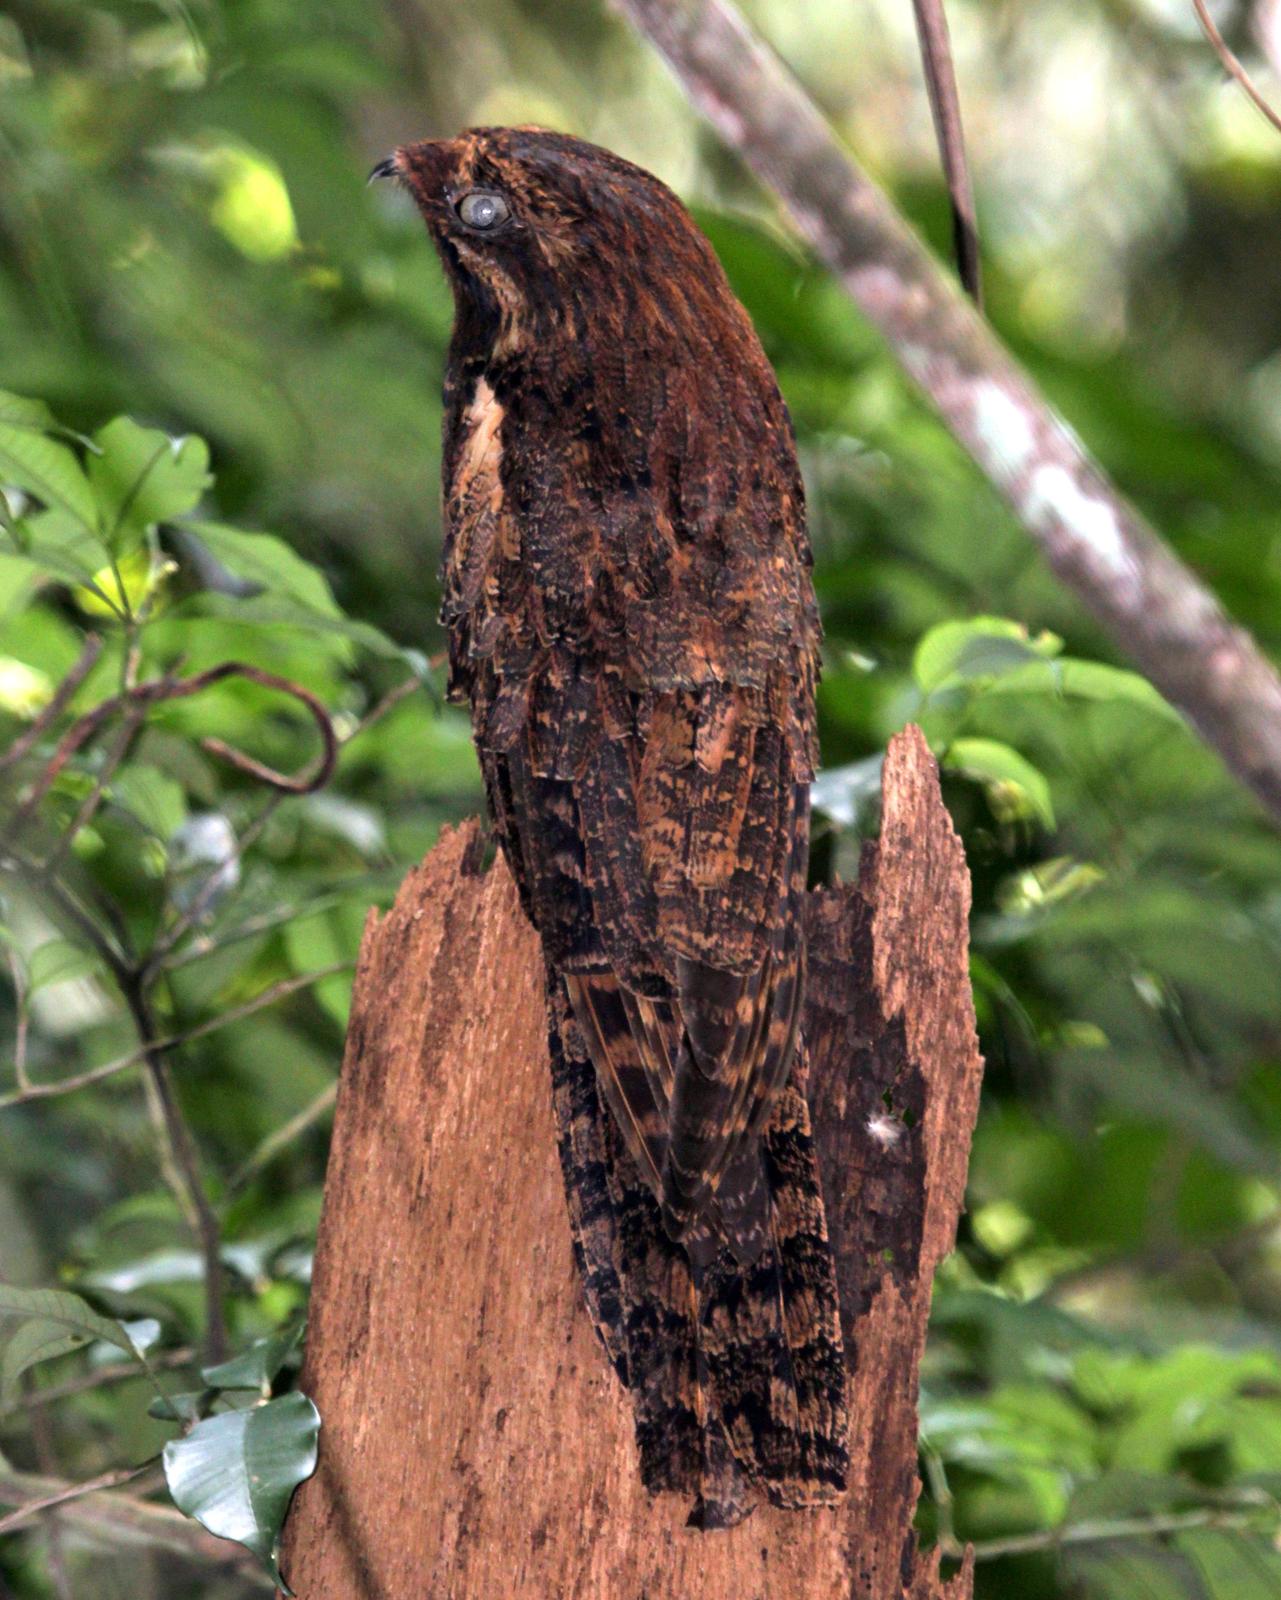 Long-tailed Potoo Photo by Mark Scheuerman